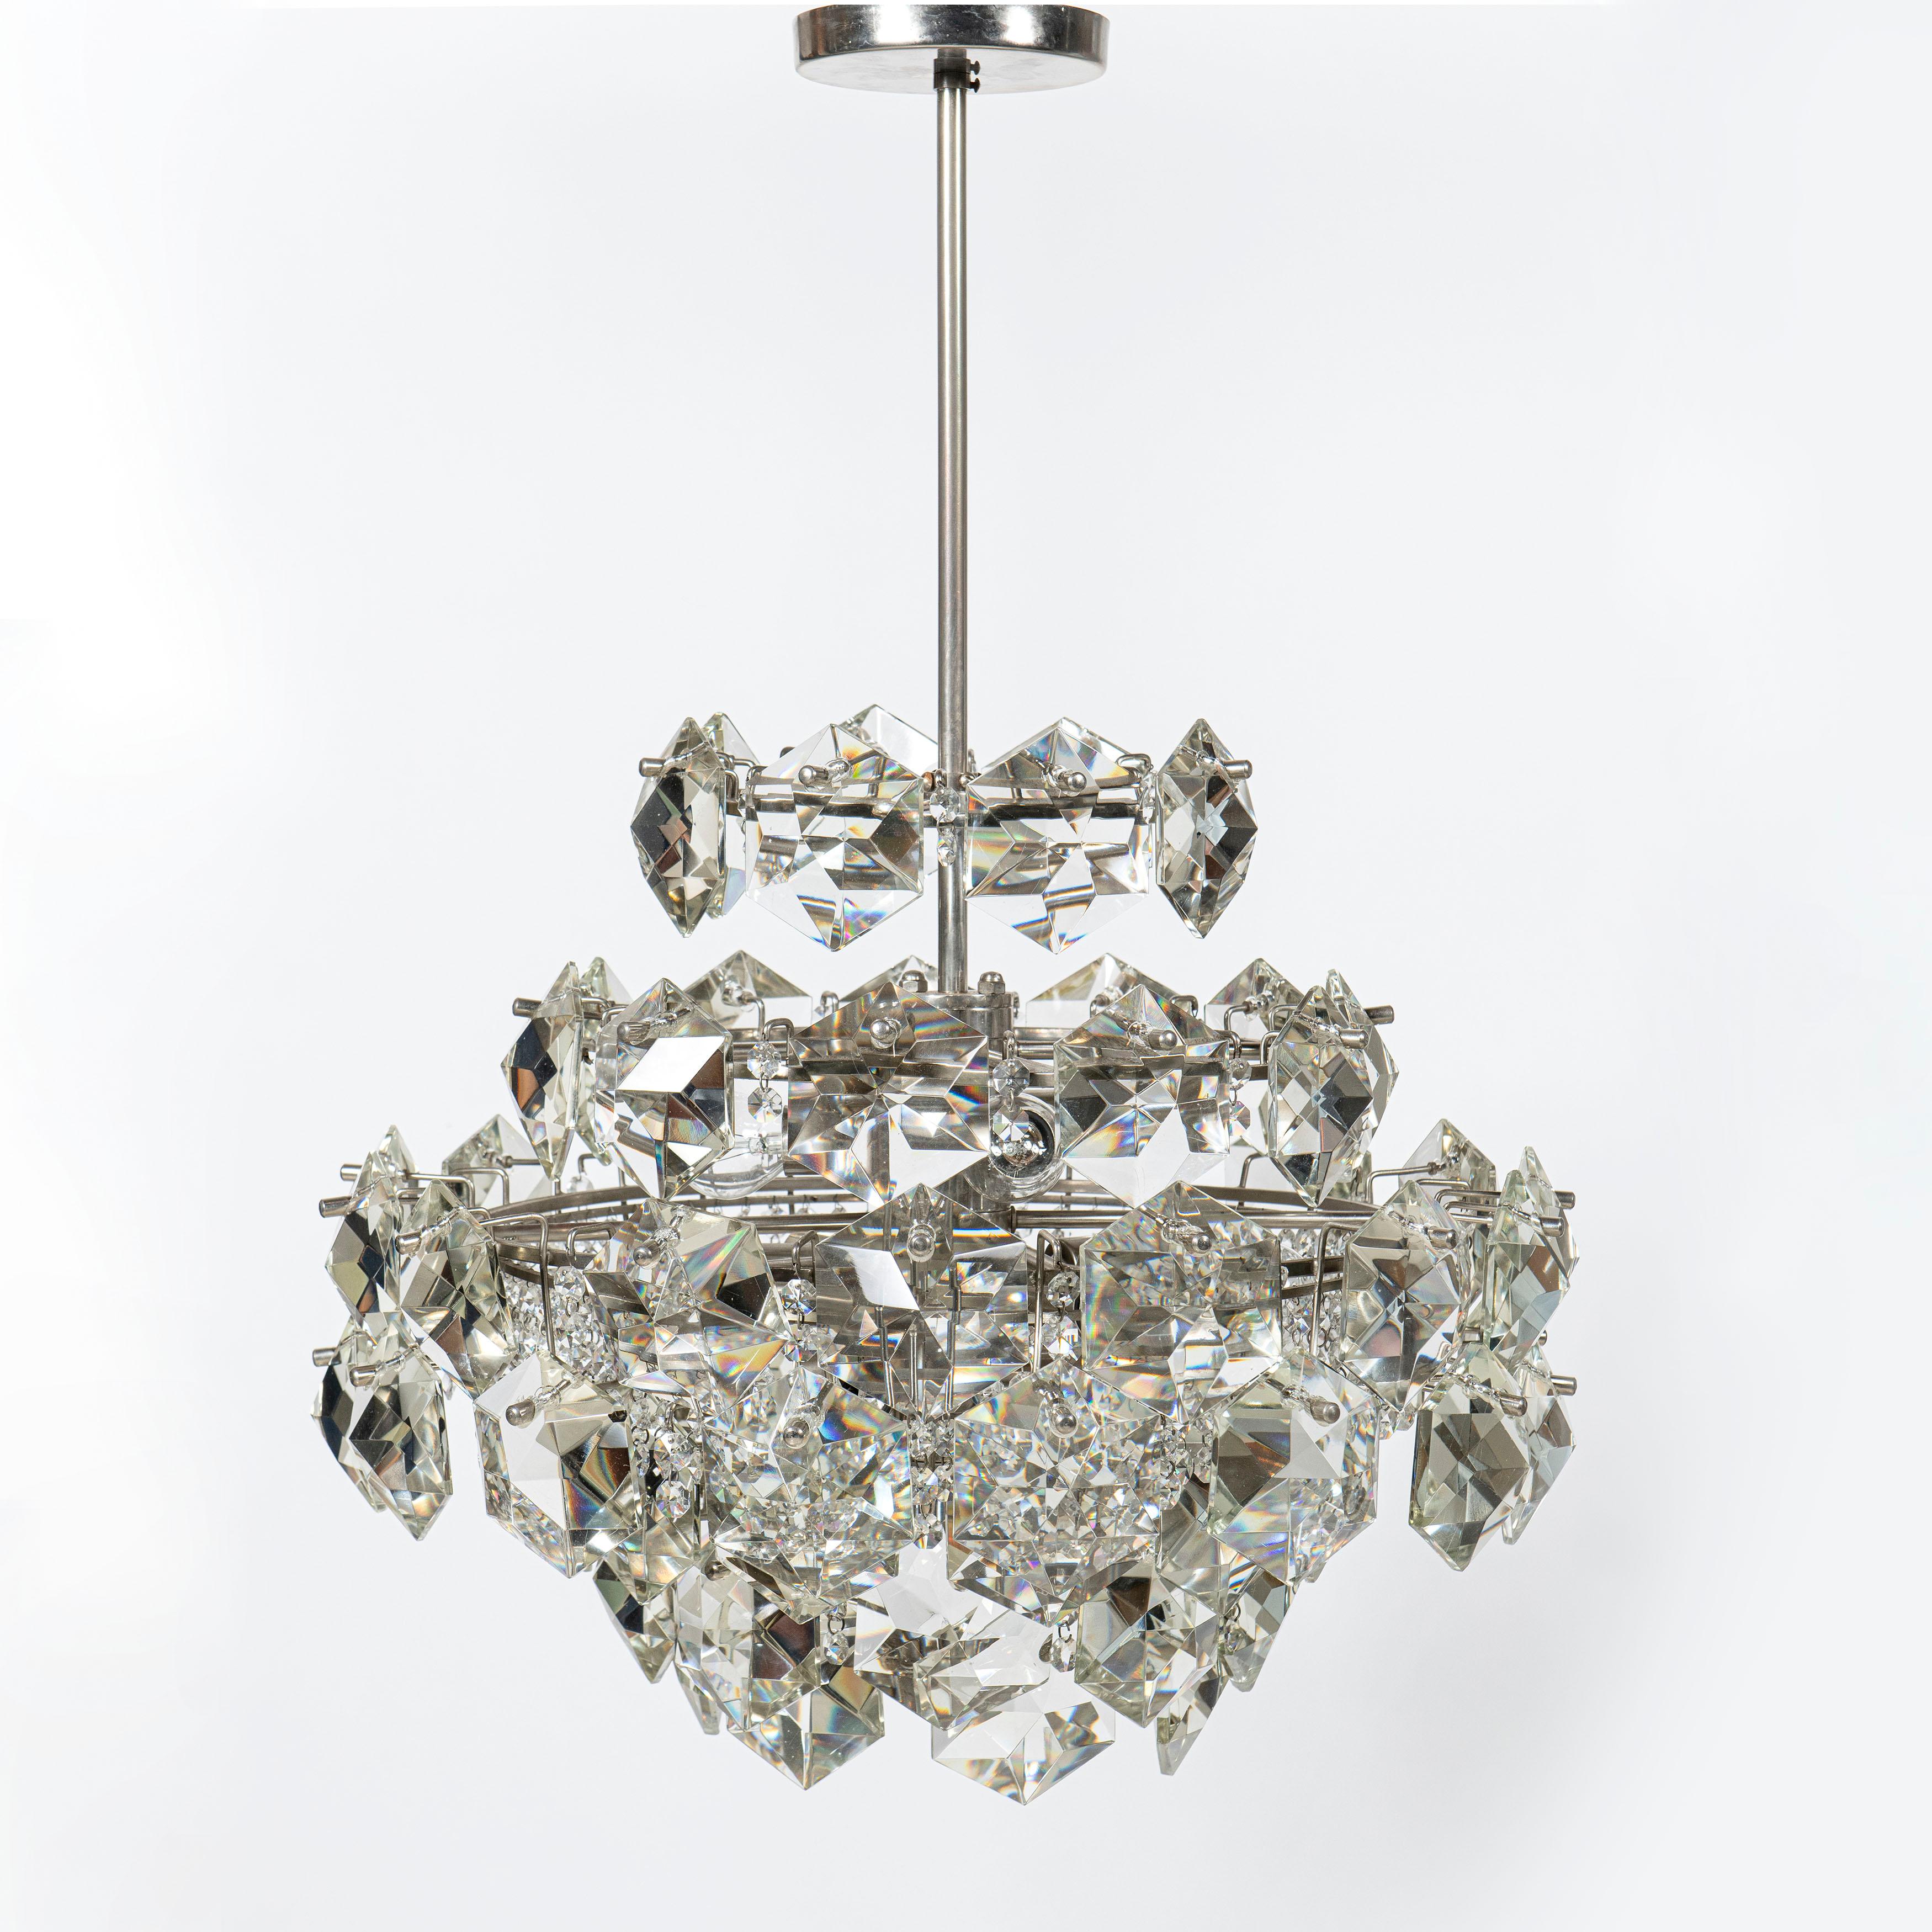 Mid-Century Modern Pair of Chrome Metal and Crystal Glass Chandeliers by Bakalowits & Söhne, 1960 For Sale